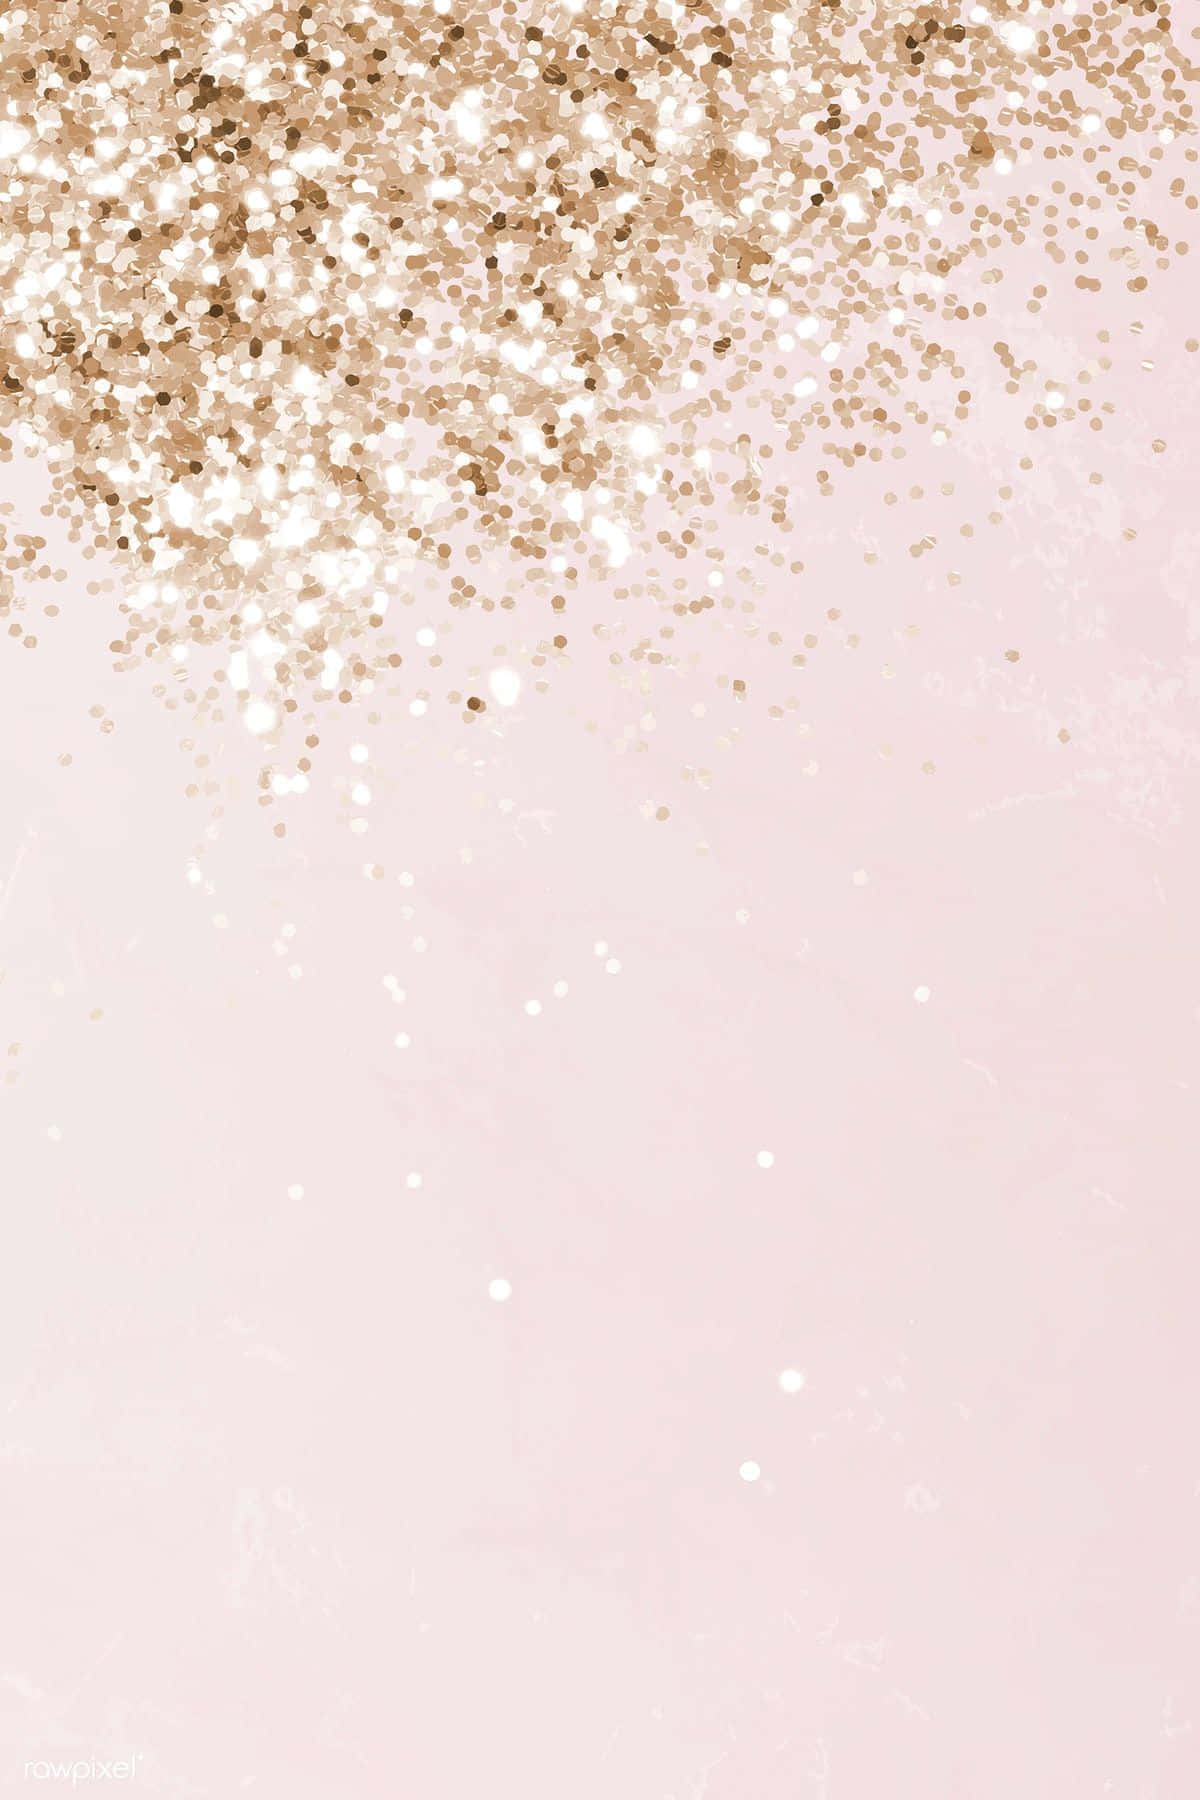 Brighten up your day with this stunning sparkle-filled background